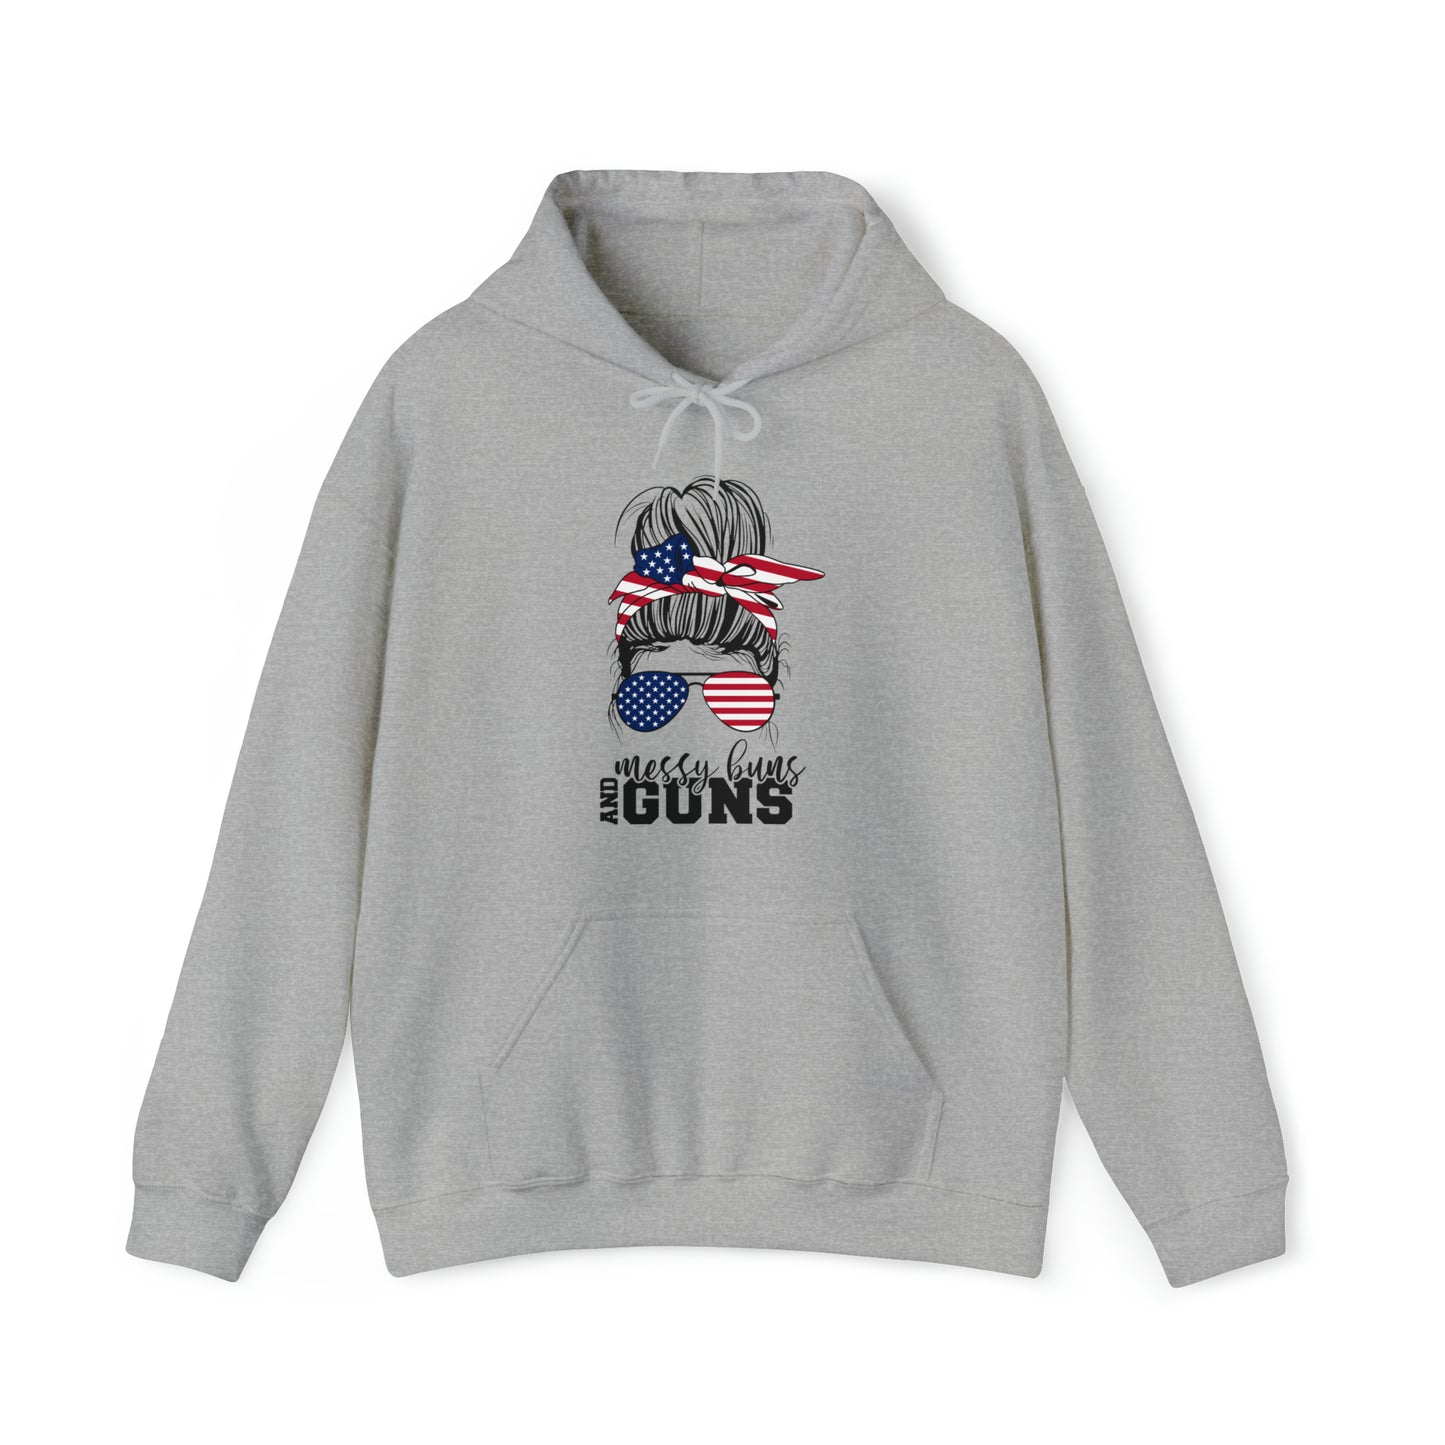 MESSY BUNS AND GUNS - UNISEX HOODIE